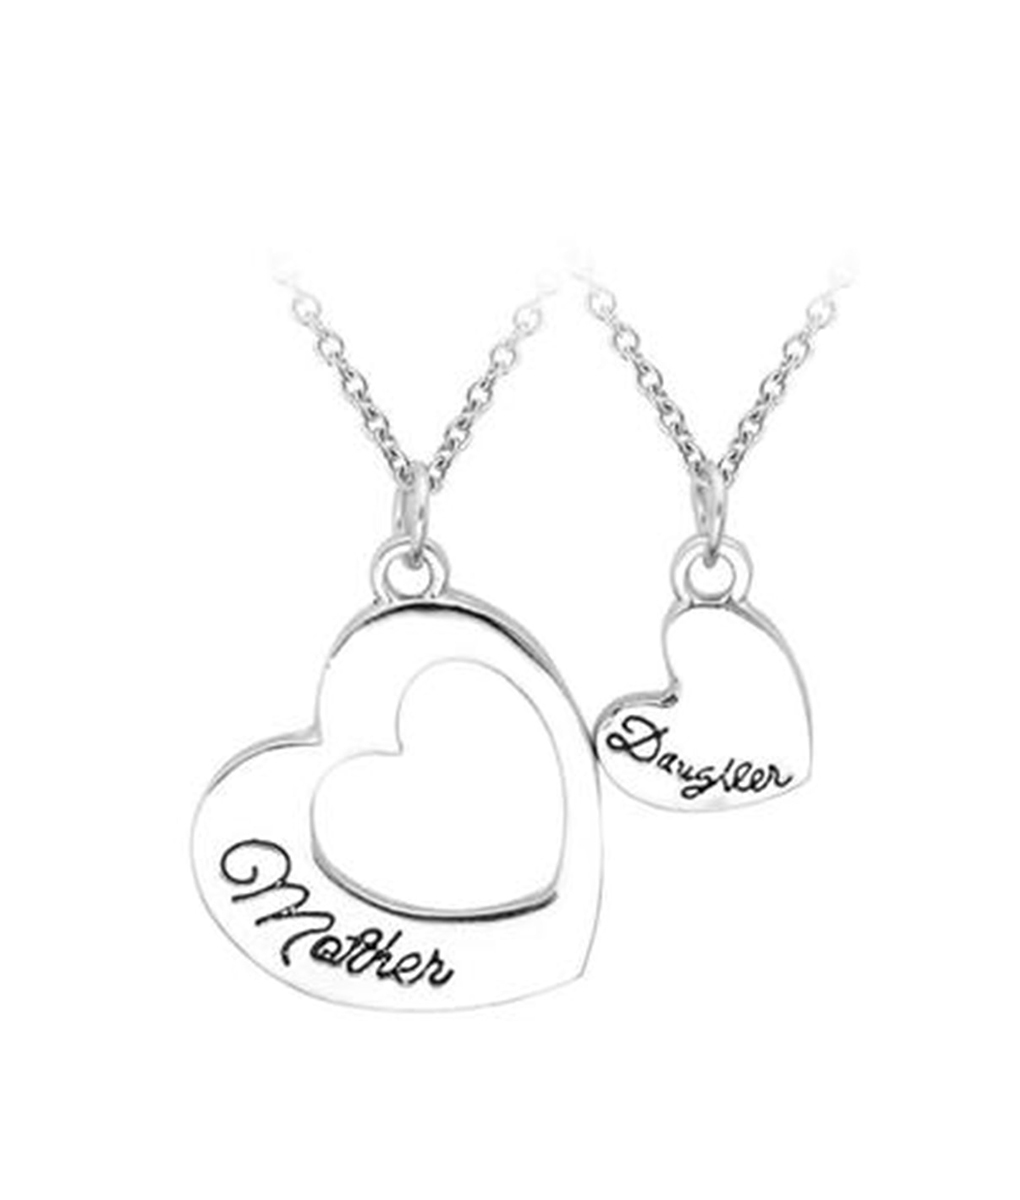 https://www.joopzy.com/wp-content/uploads/2019/02/2pc-Selling-Jewelry-Mother-S-Day-Gift-Splicing-Necklaces-Wholesale-Mother-Daughter-Love-Letters-Pendant-Necklace-1-1.jpg